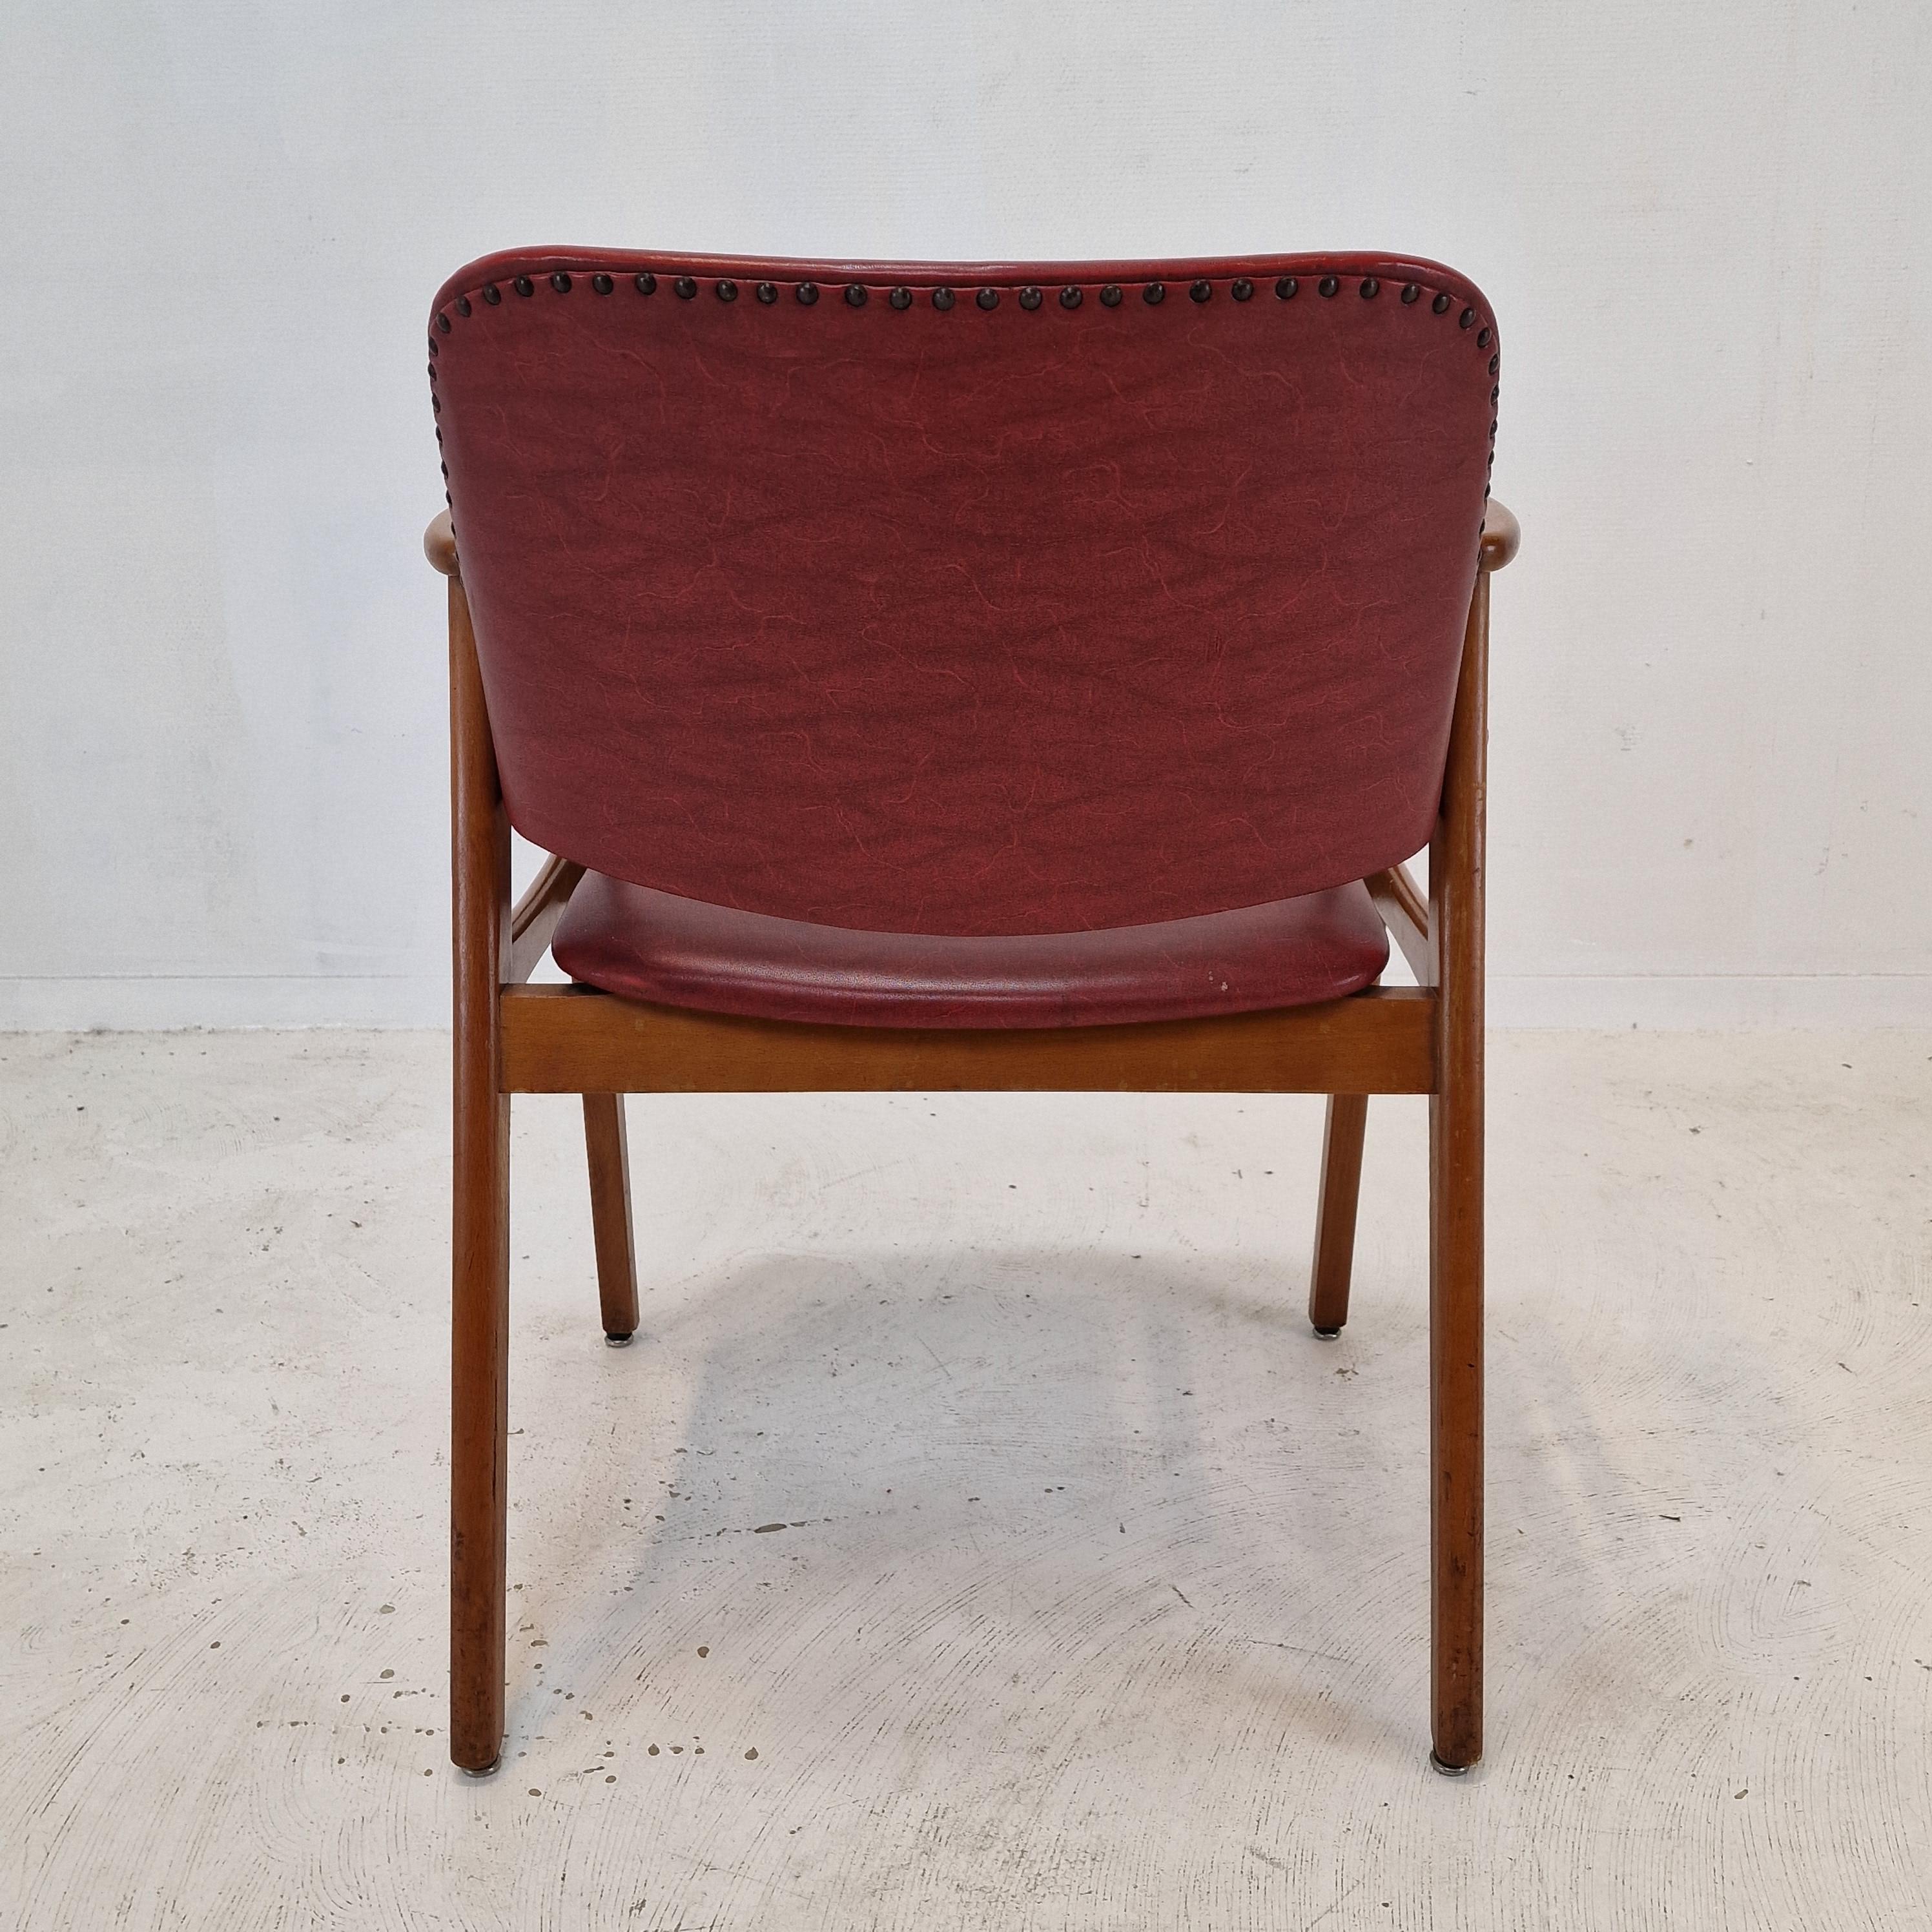 Midcentury Dining or Restaurant Chairs by Cees Braakman for Pastoe, 1950s For Sale 2